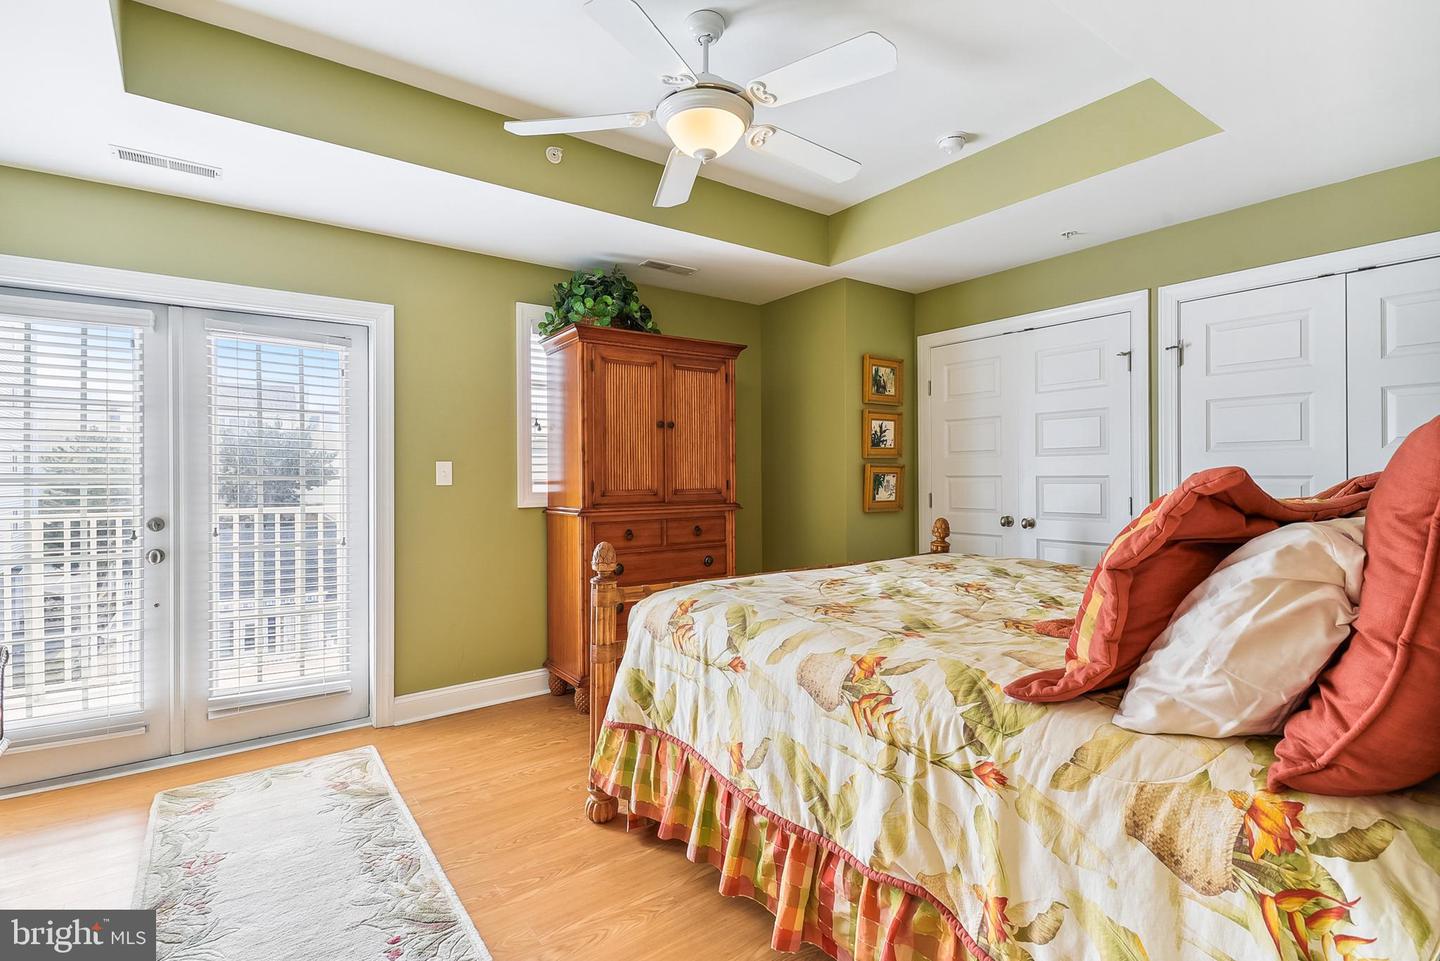 MDWO2019340-802917094606-2024-03-12-11-41-10 14301 Wight St #201 | Ocean City, MD Real Estate For Sale | MLS# Mdwo2019340  - 1st Choice Properties